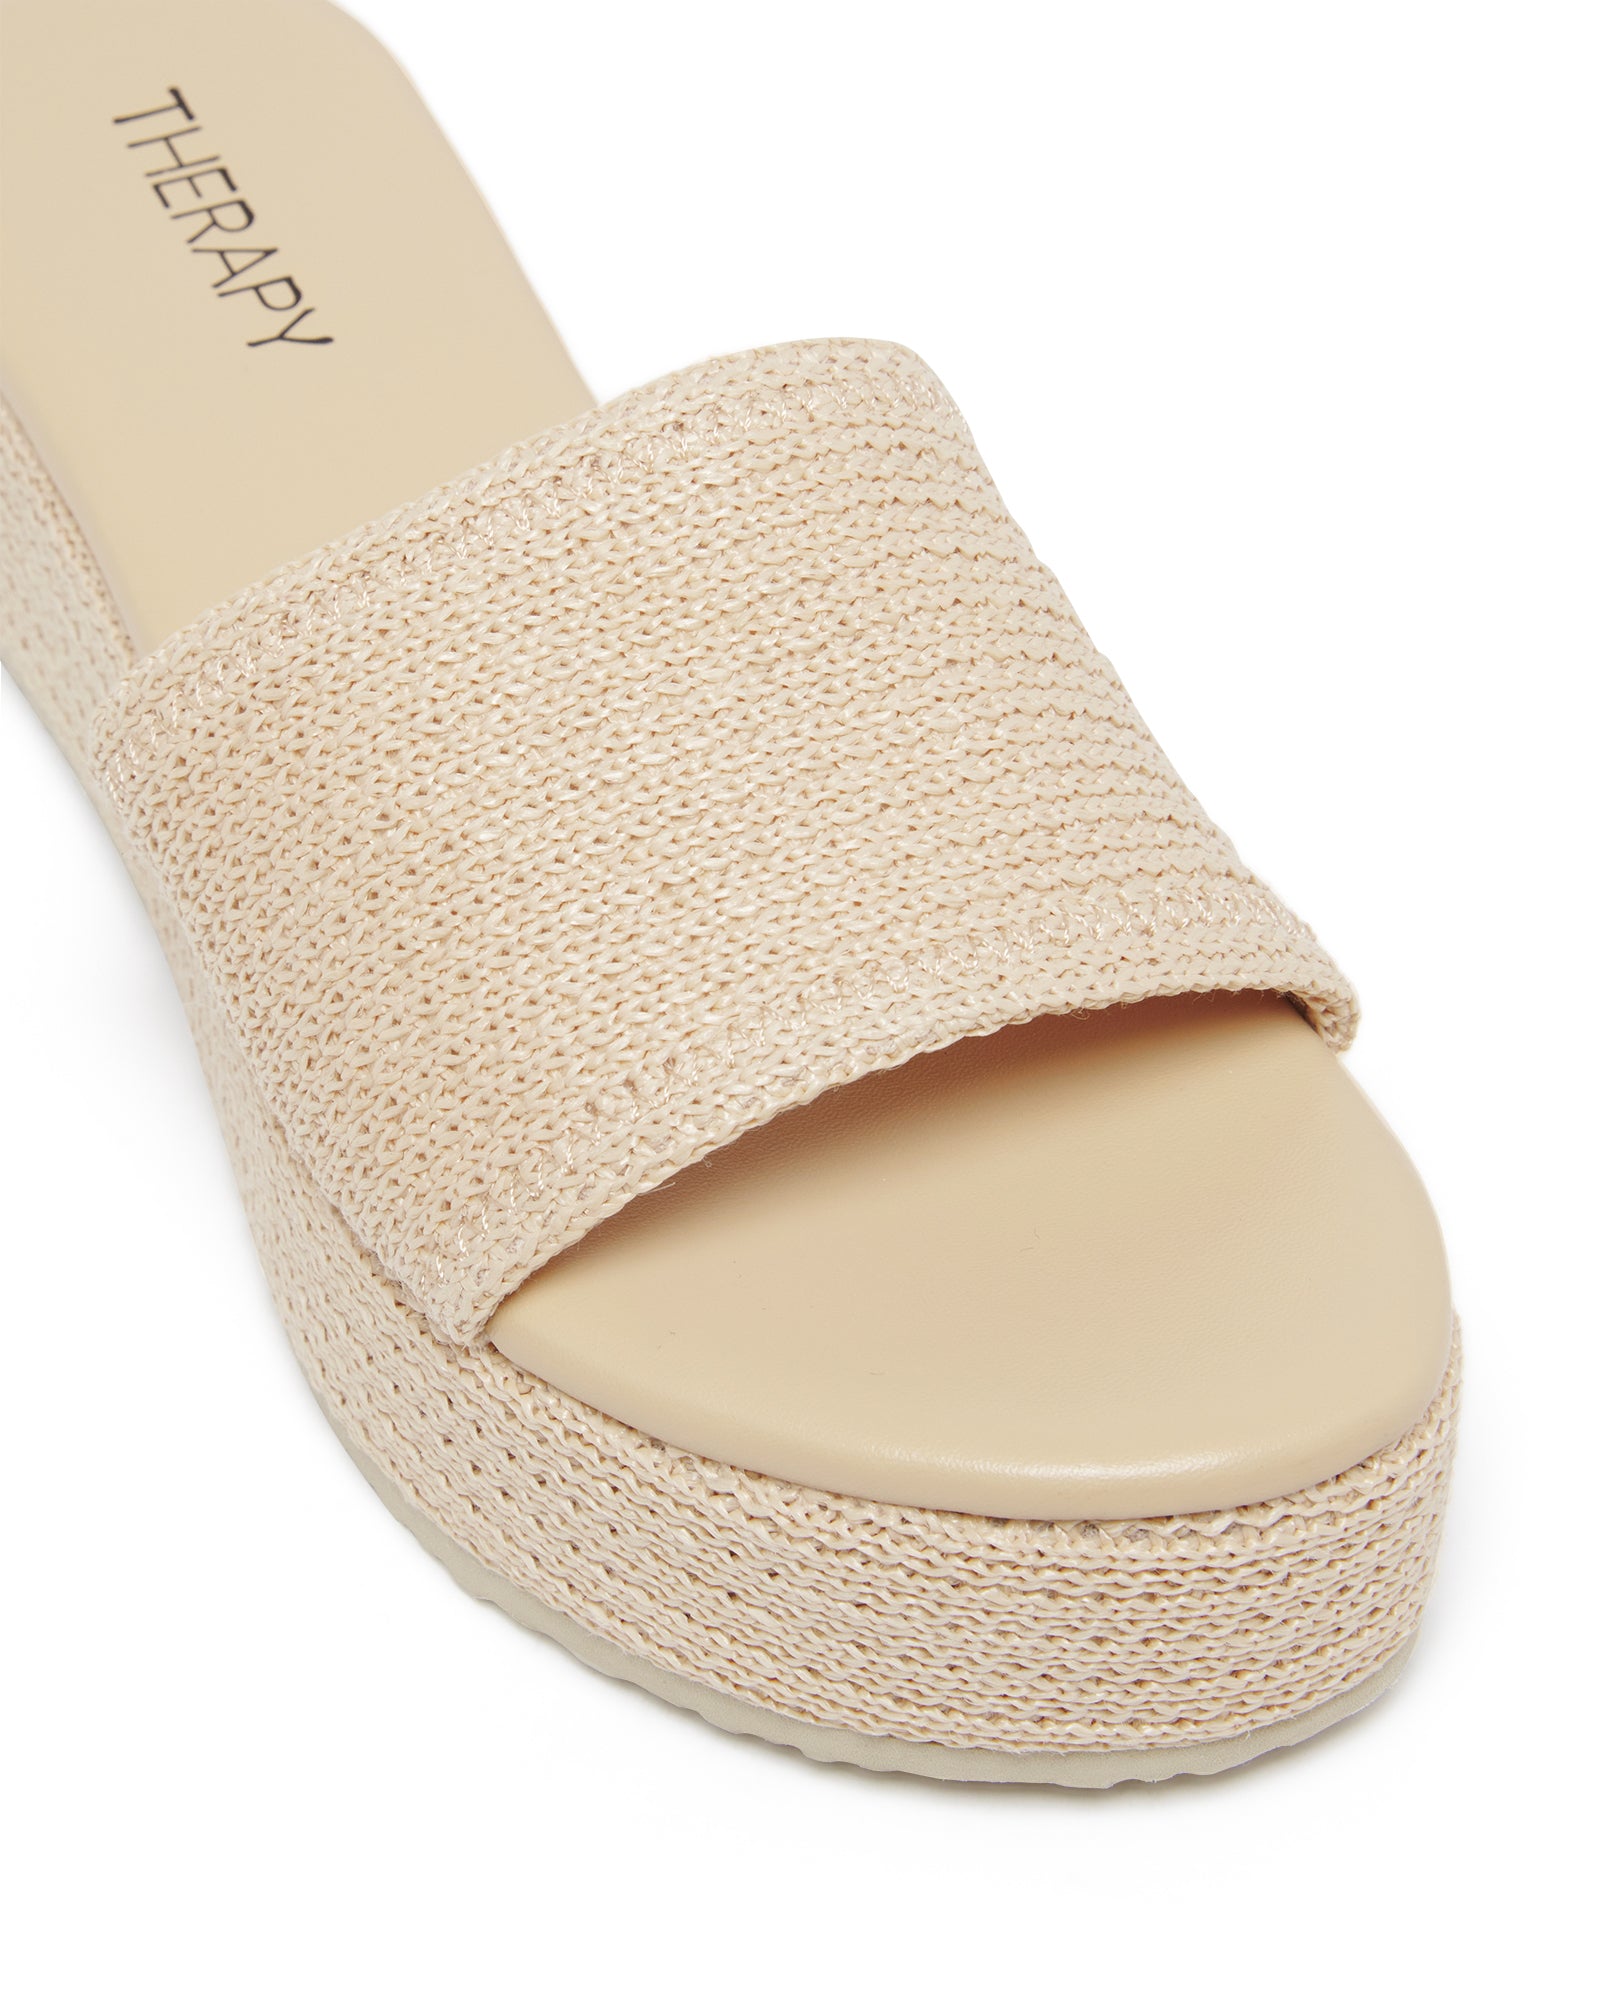 Therapy Shoes Avery Natural Raffia | Women's Sandals | Slides | Flatform